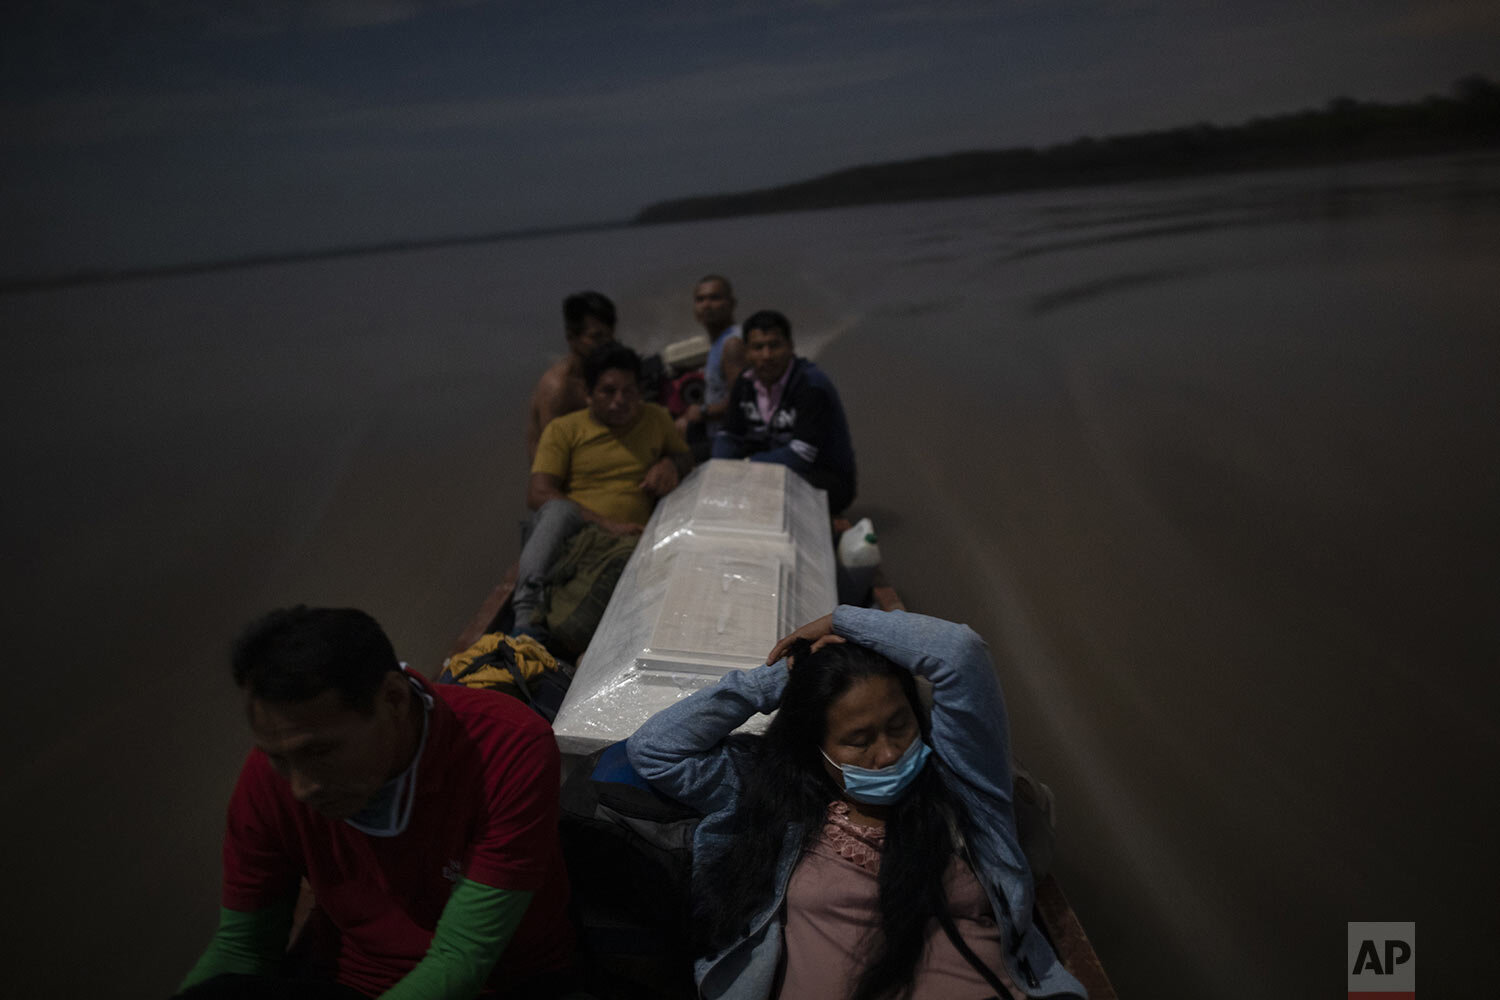  Relatives accompany the coffin that contains the remains of Jose Barbaran who is believed to have died from complications related to the new coronavirus, as they travel by boat on Peru's Ucayali River, Sept. 29, 2020. (AP Photo/Rodrigo Abd) 